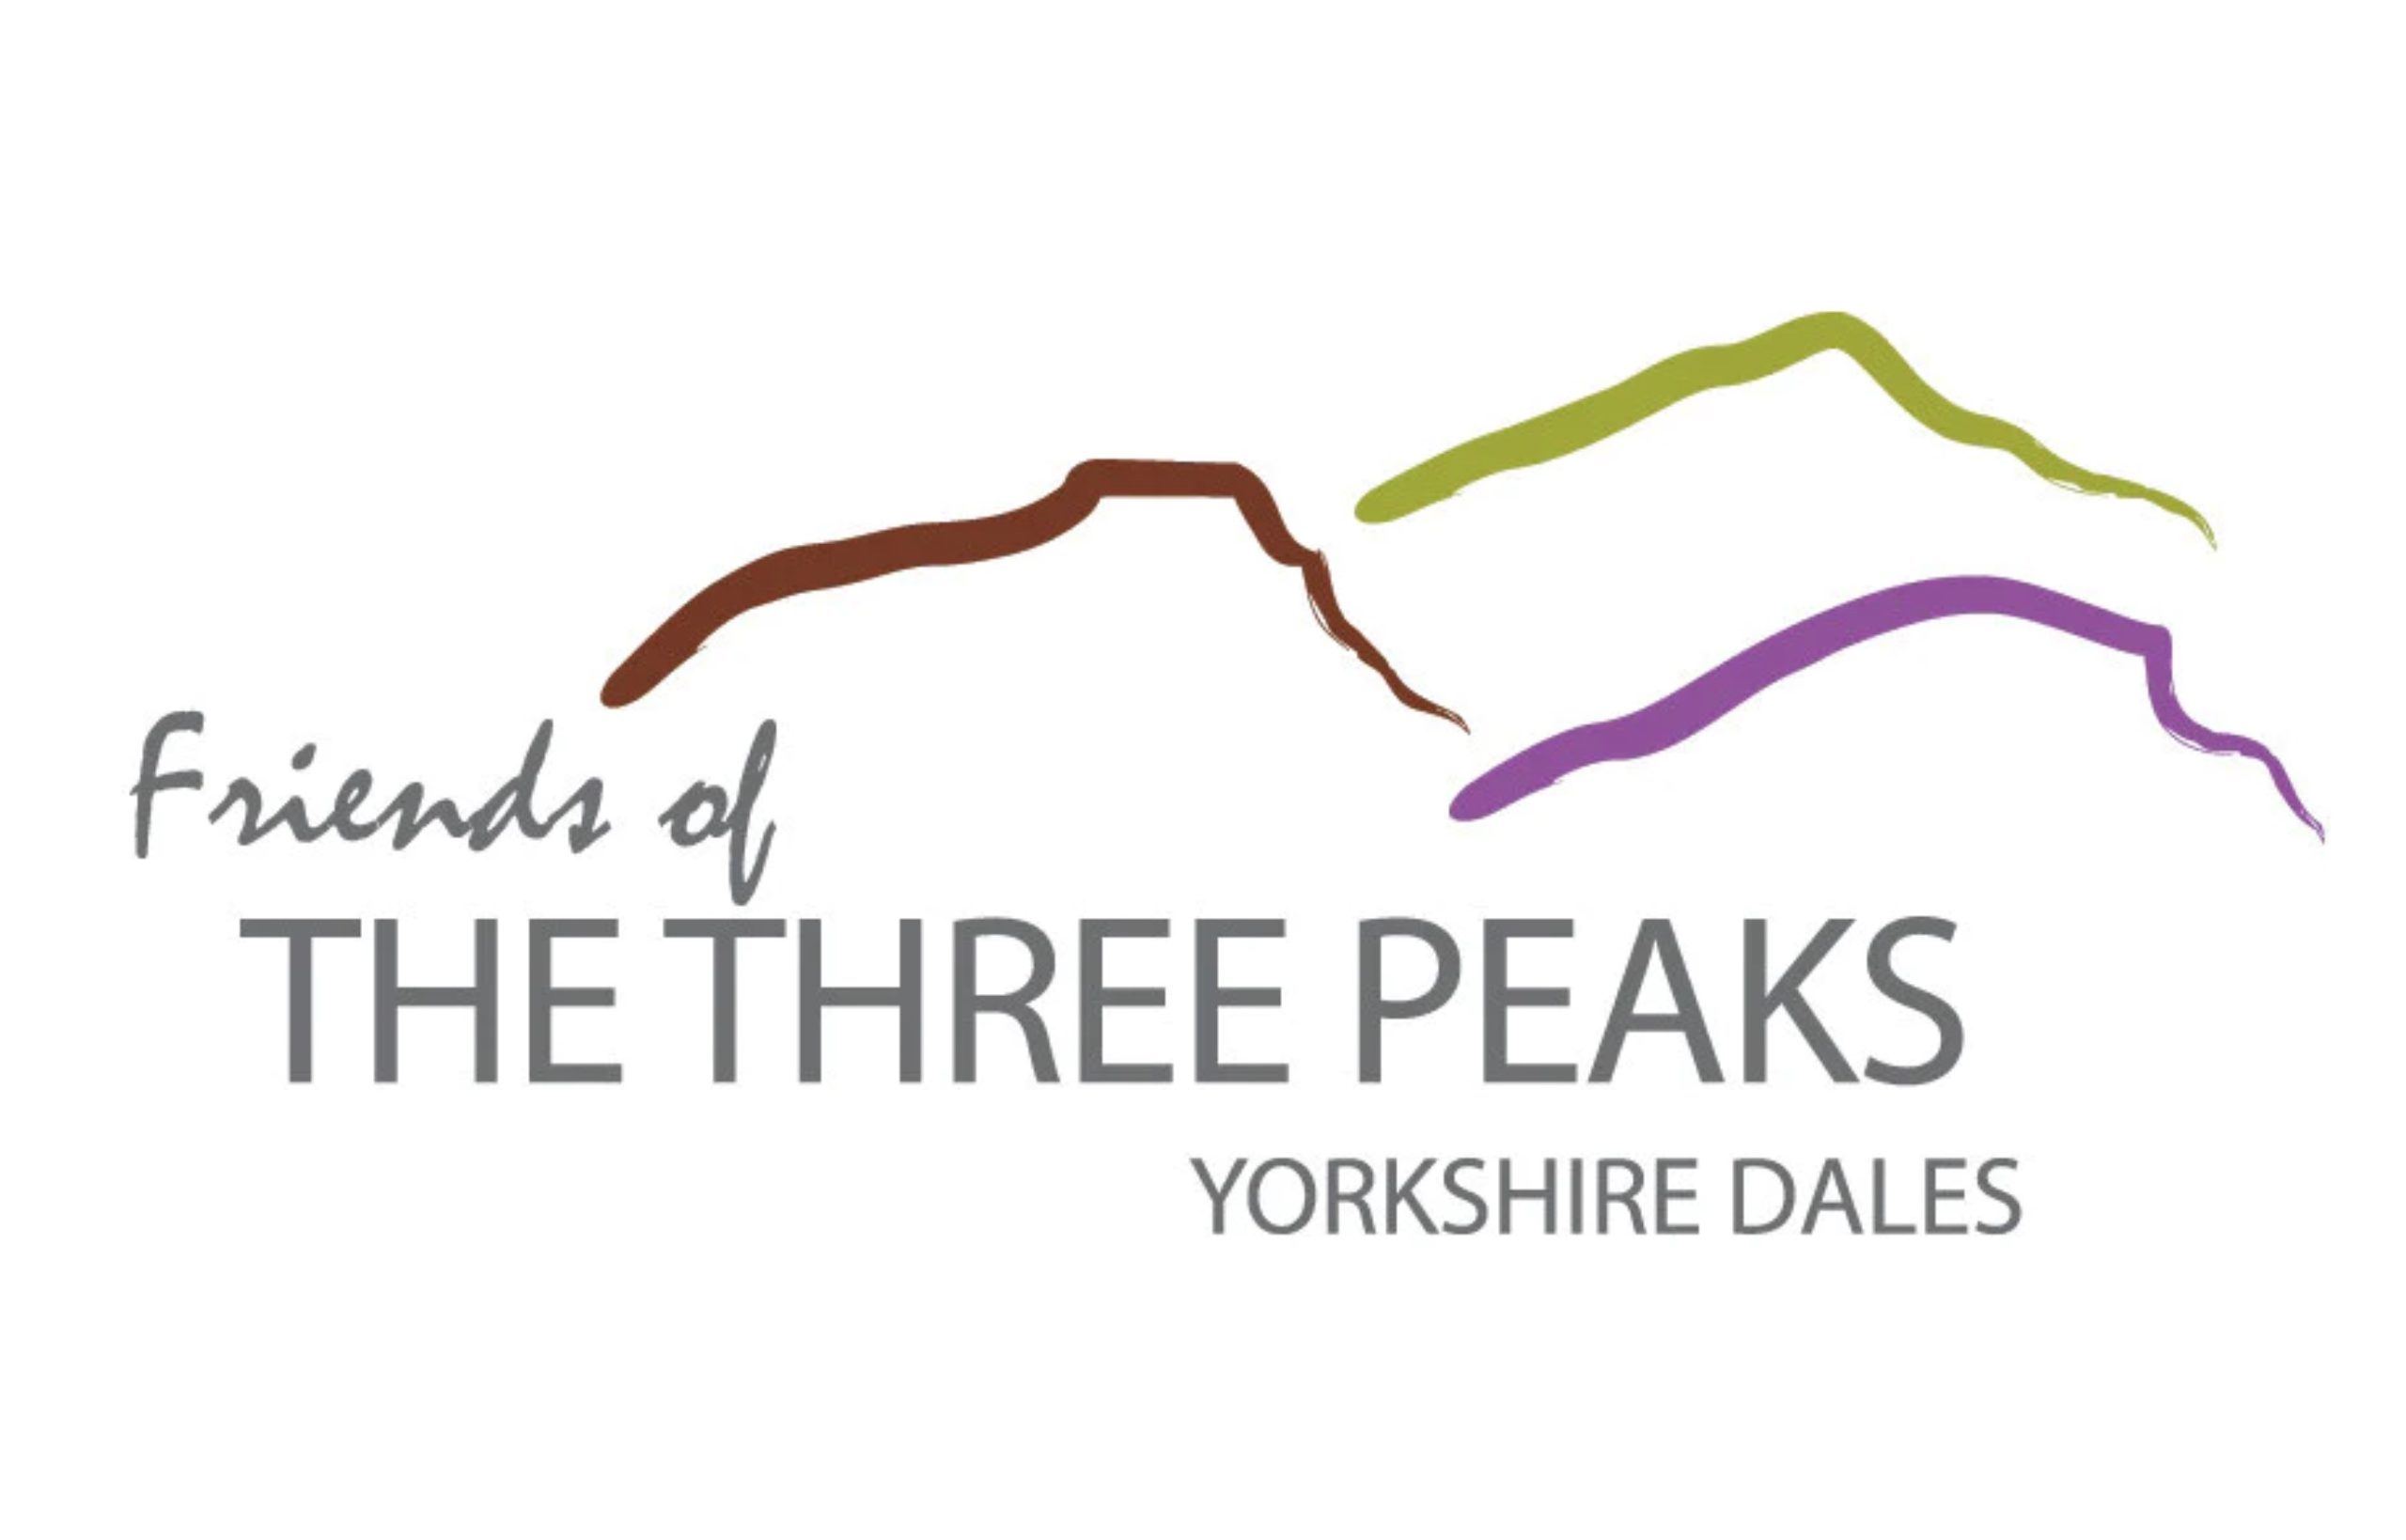 Become a friend of the Yorkshire Three Peaks